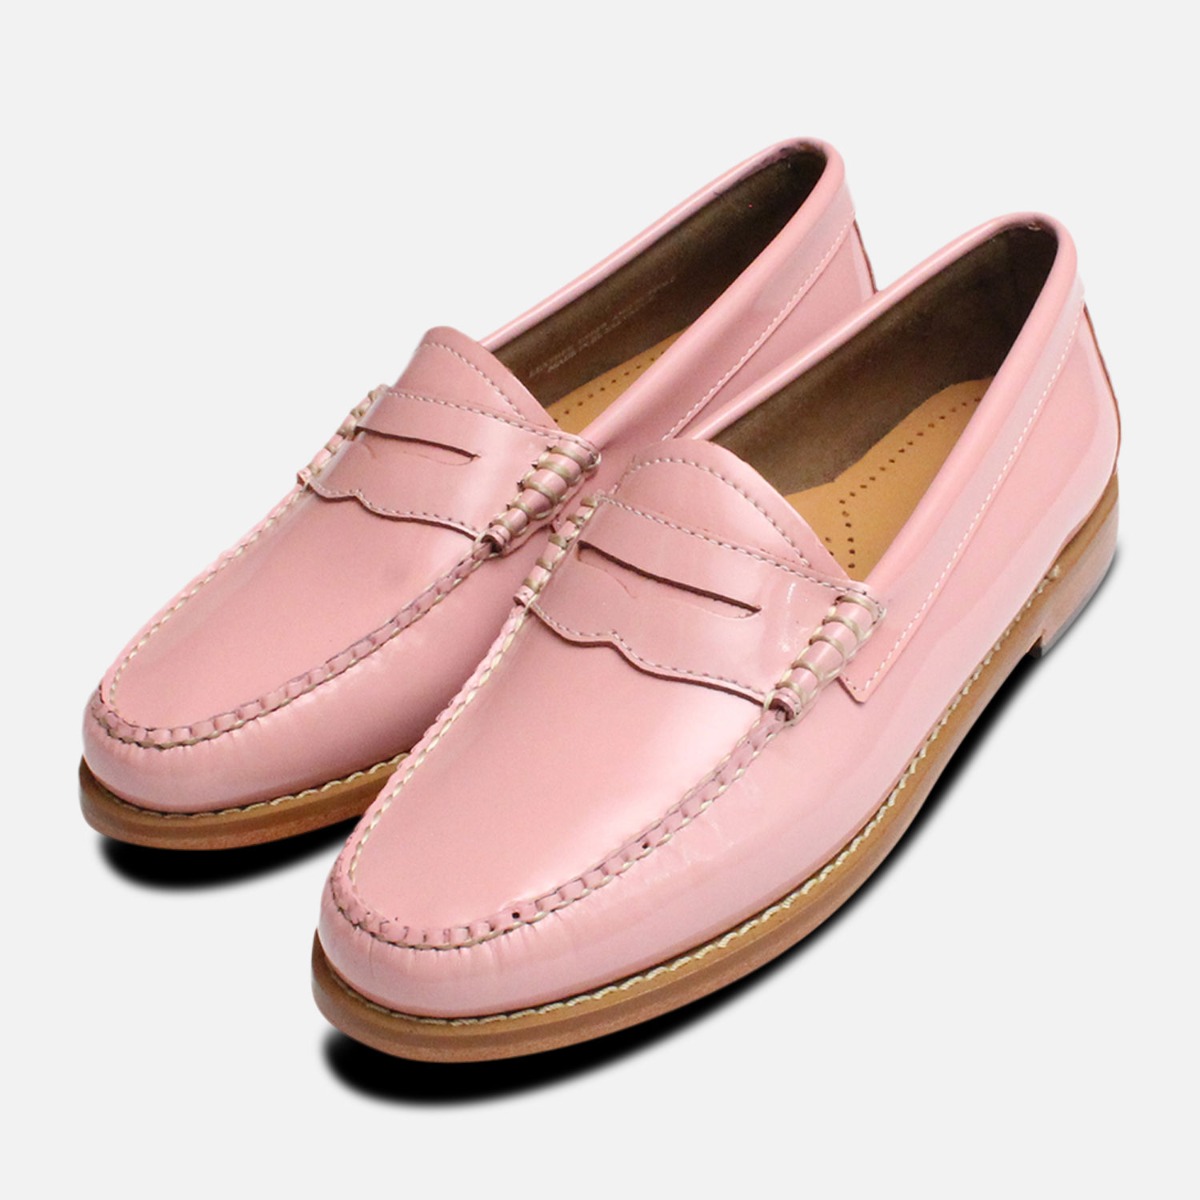 bass shoes penny loafers